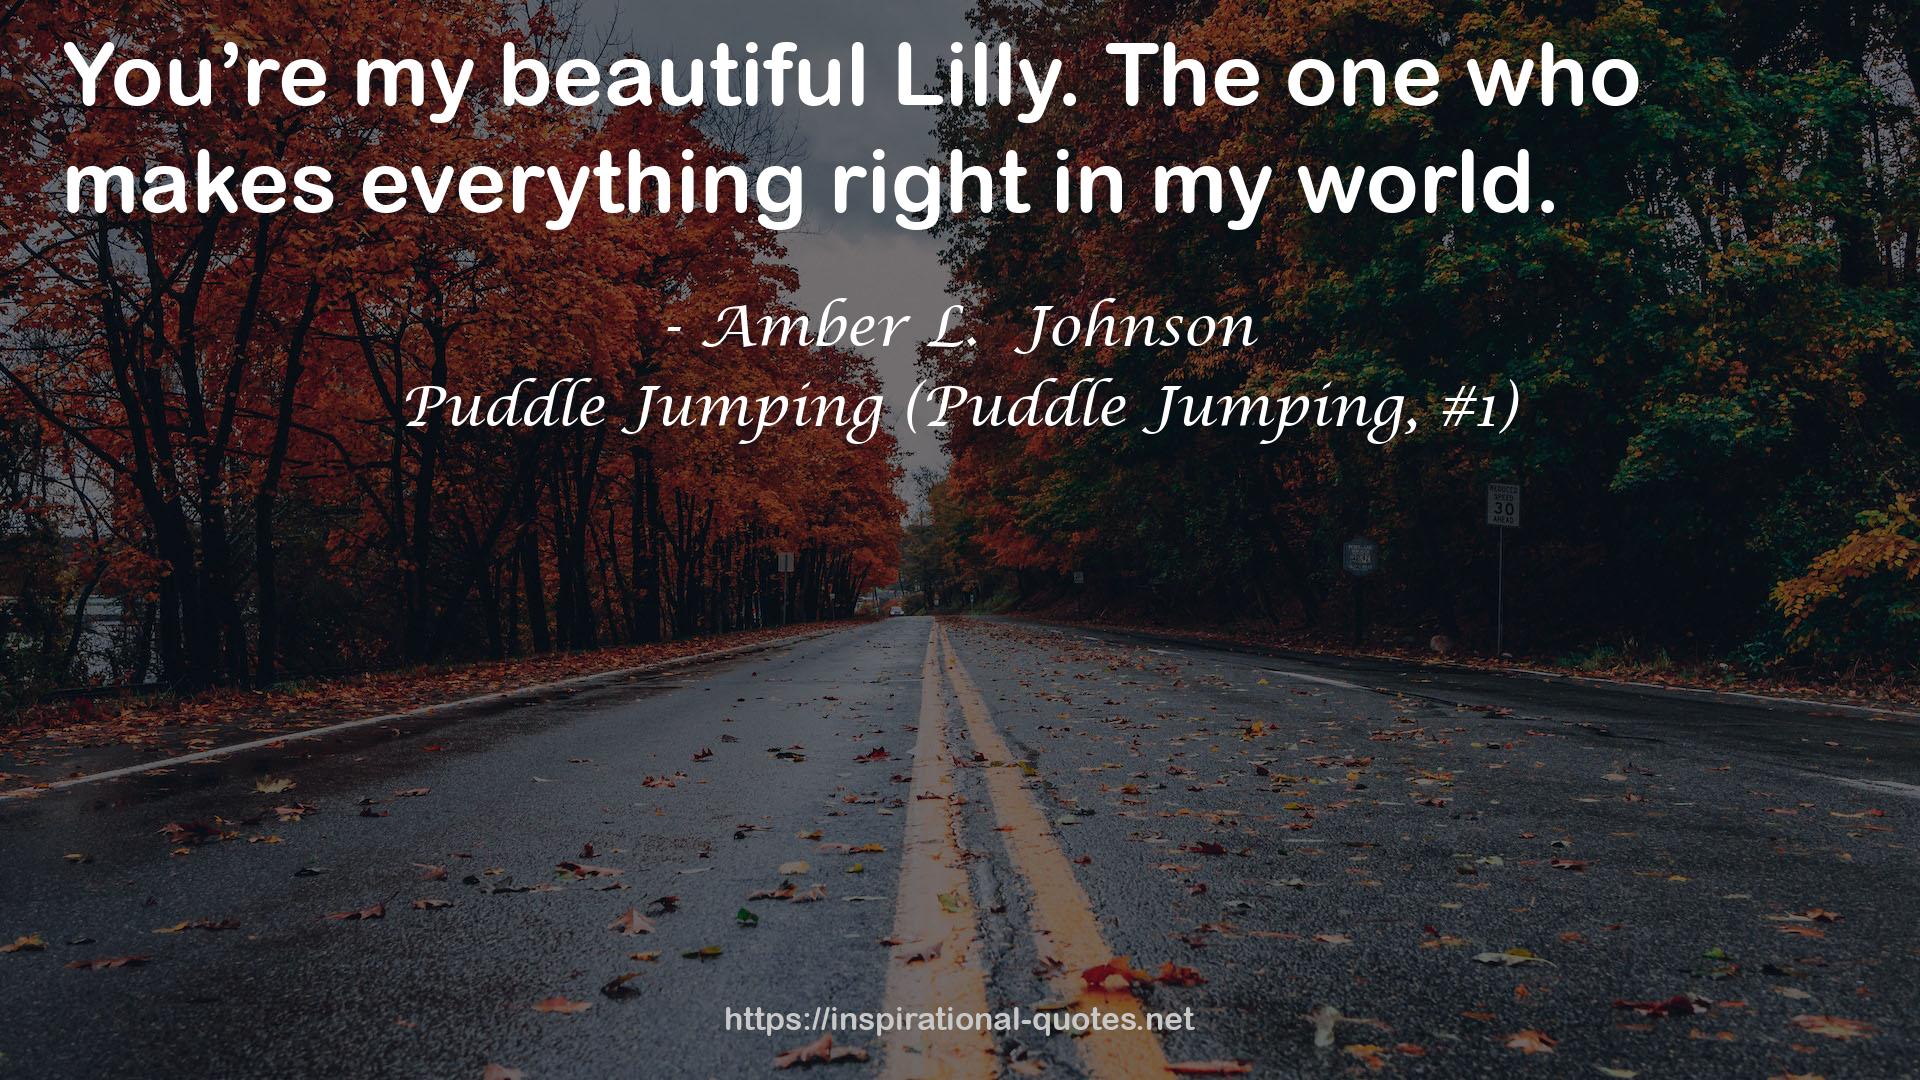 Puddle Jumping (Puddle Jumping, #1) QUOTES